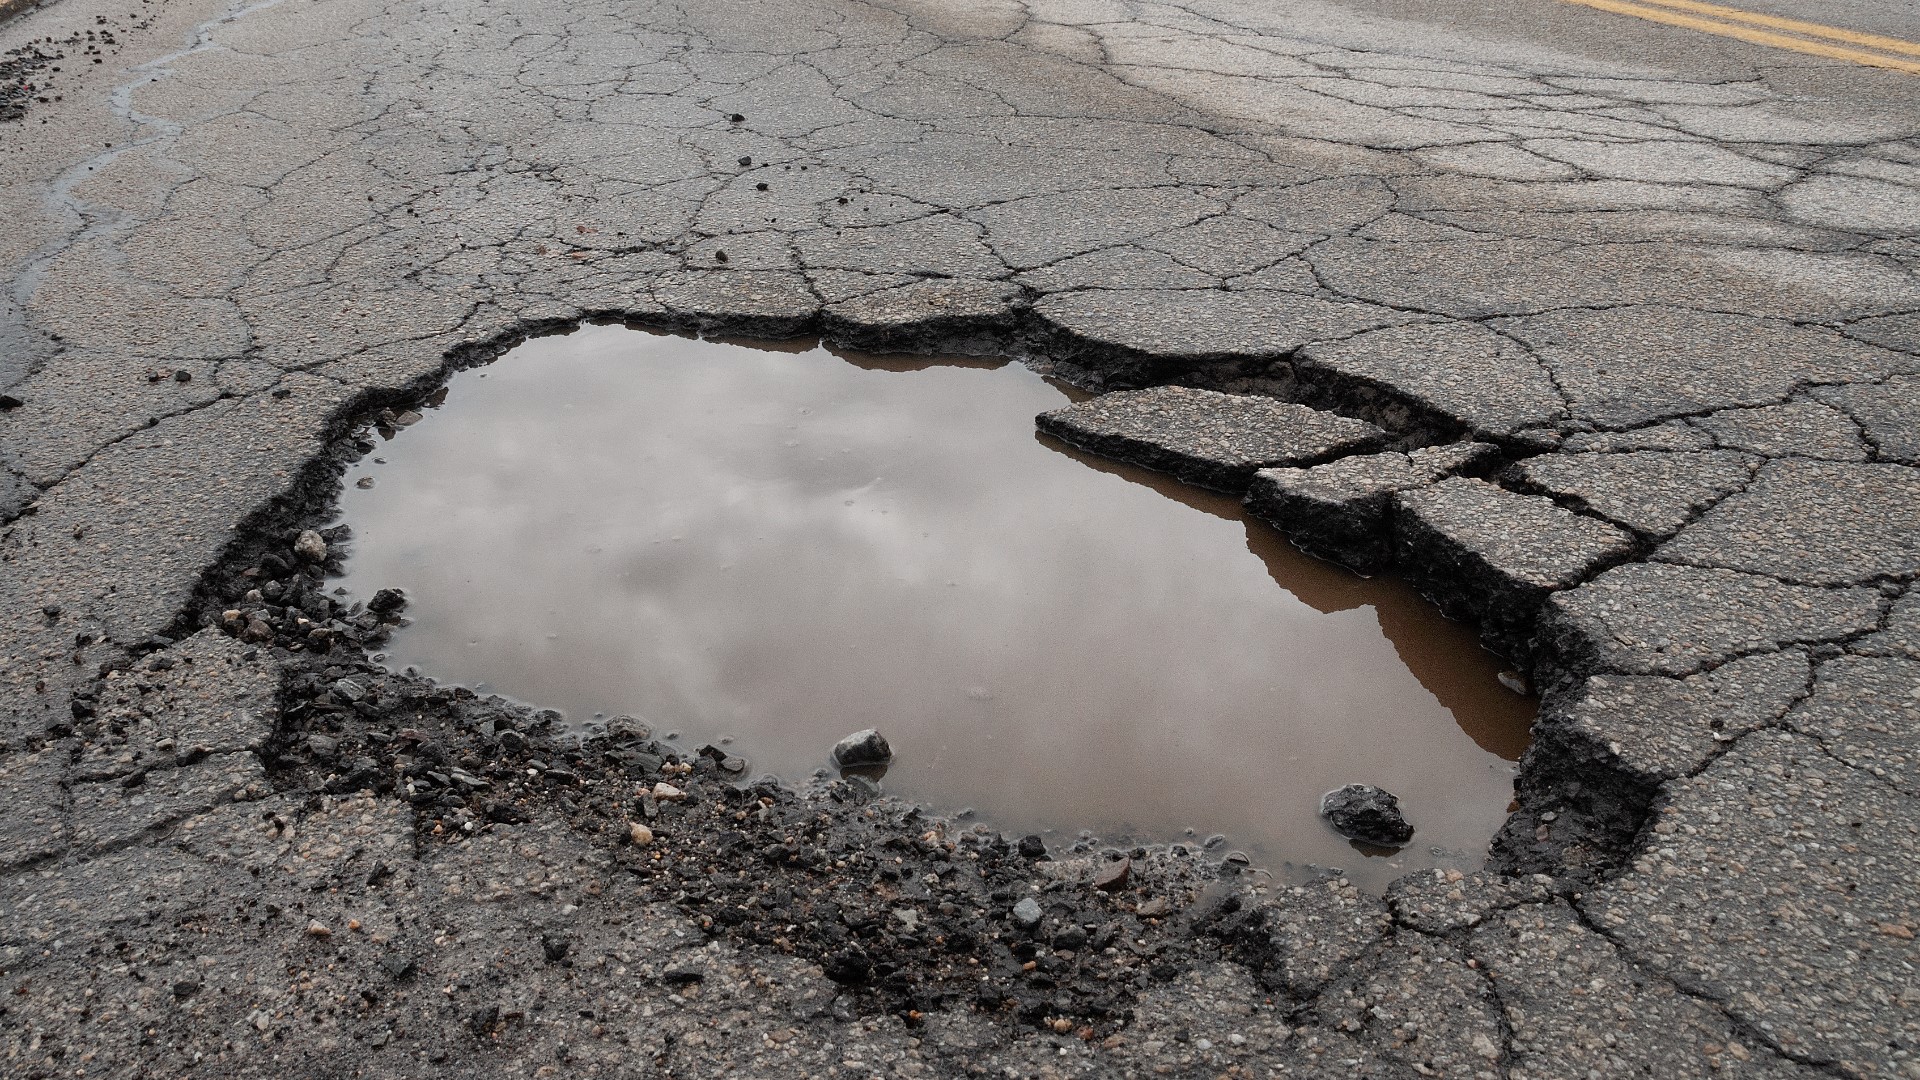 People can also submit claims with ODOT and the city to cover the repair costs from hitting a pothole.